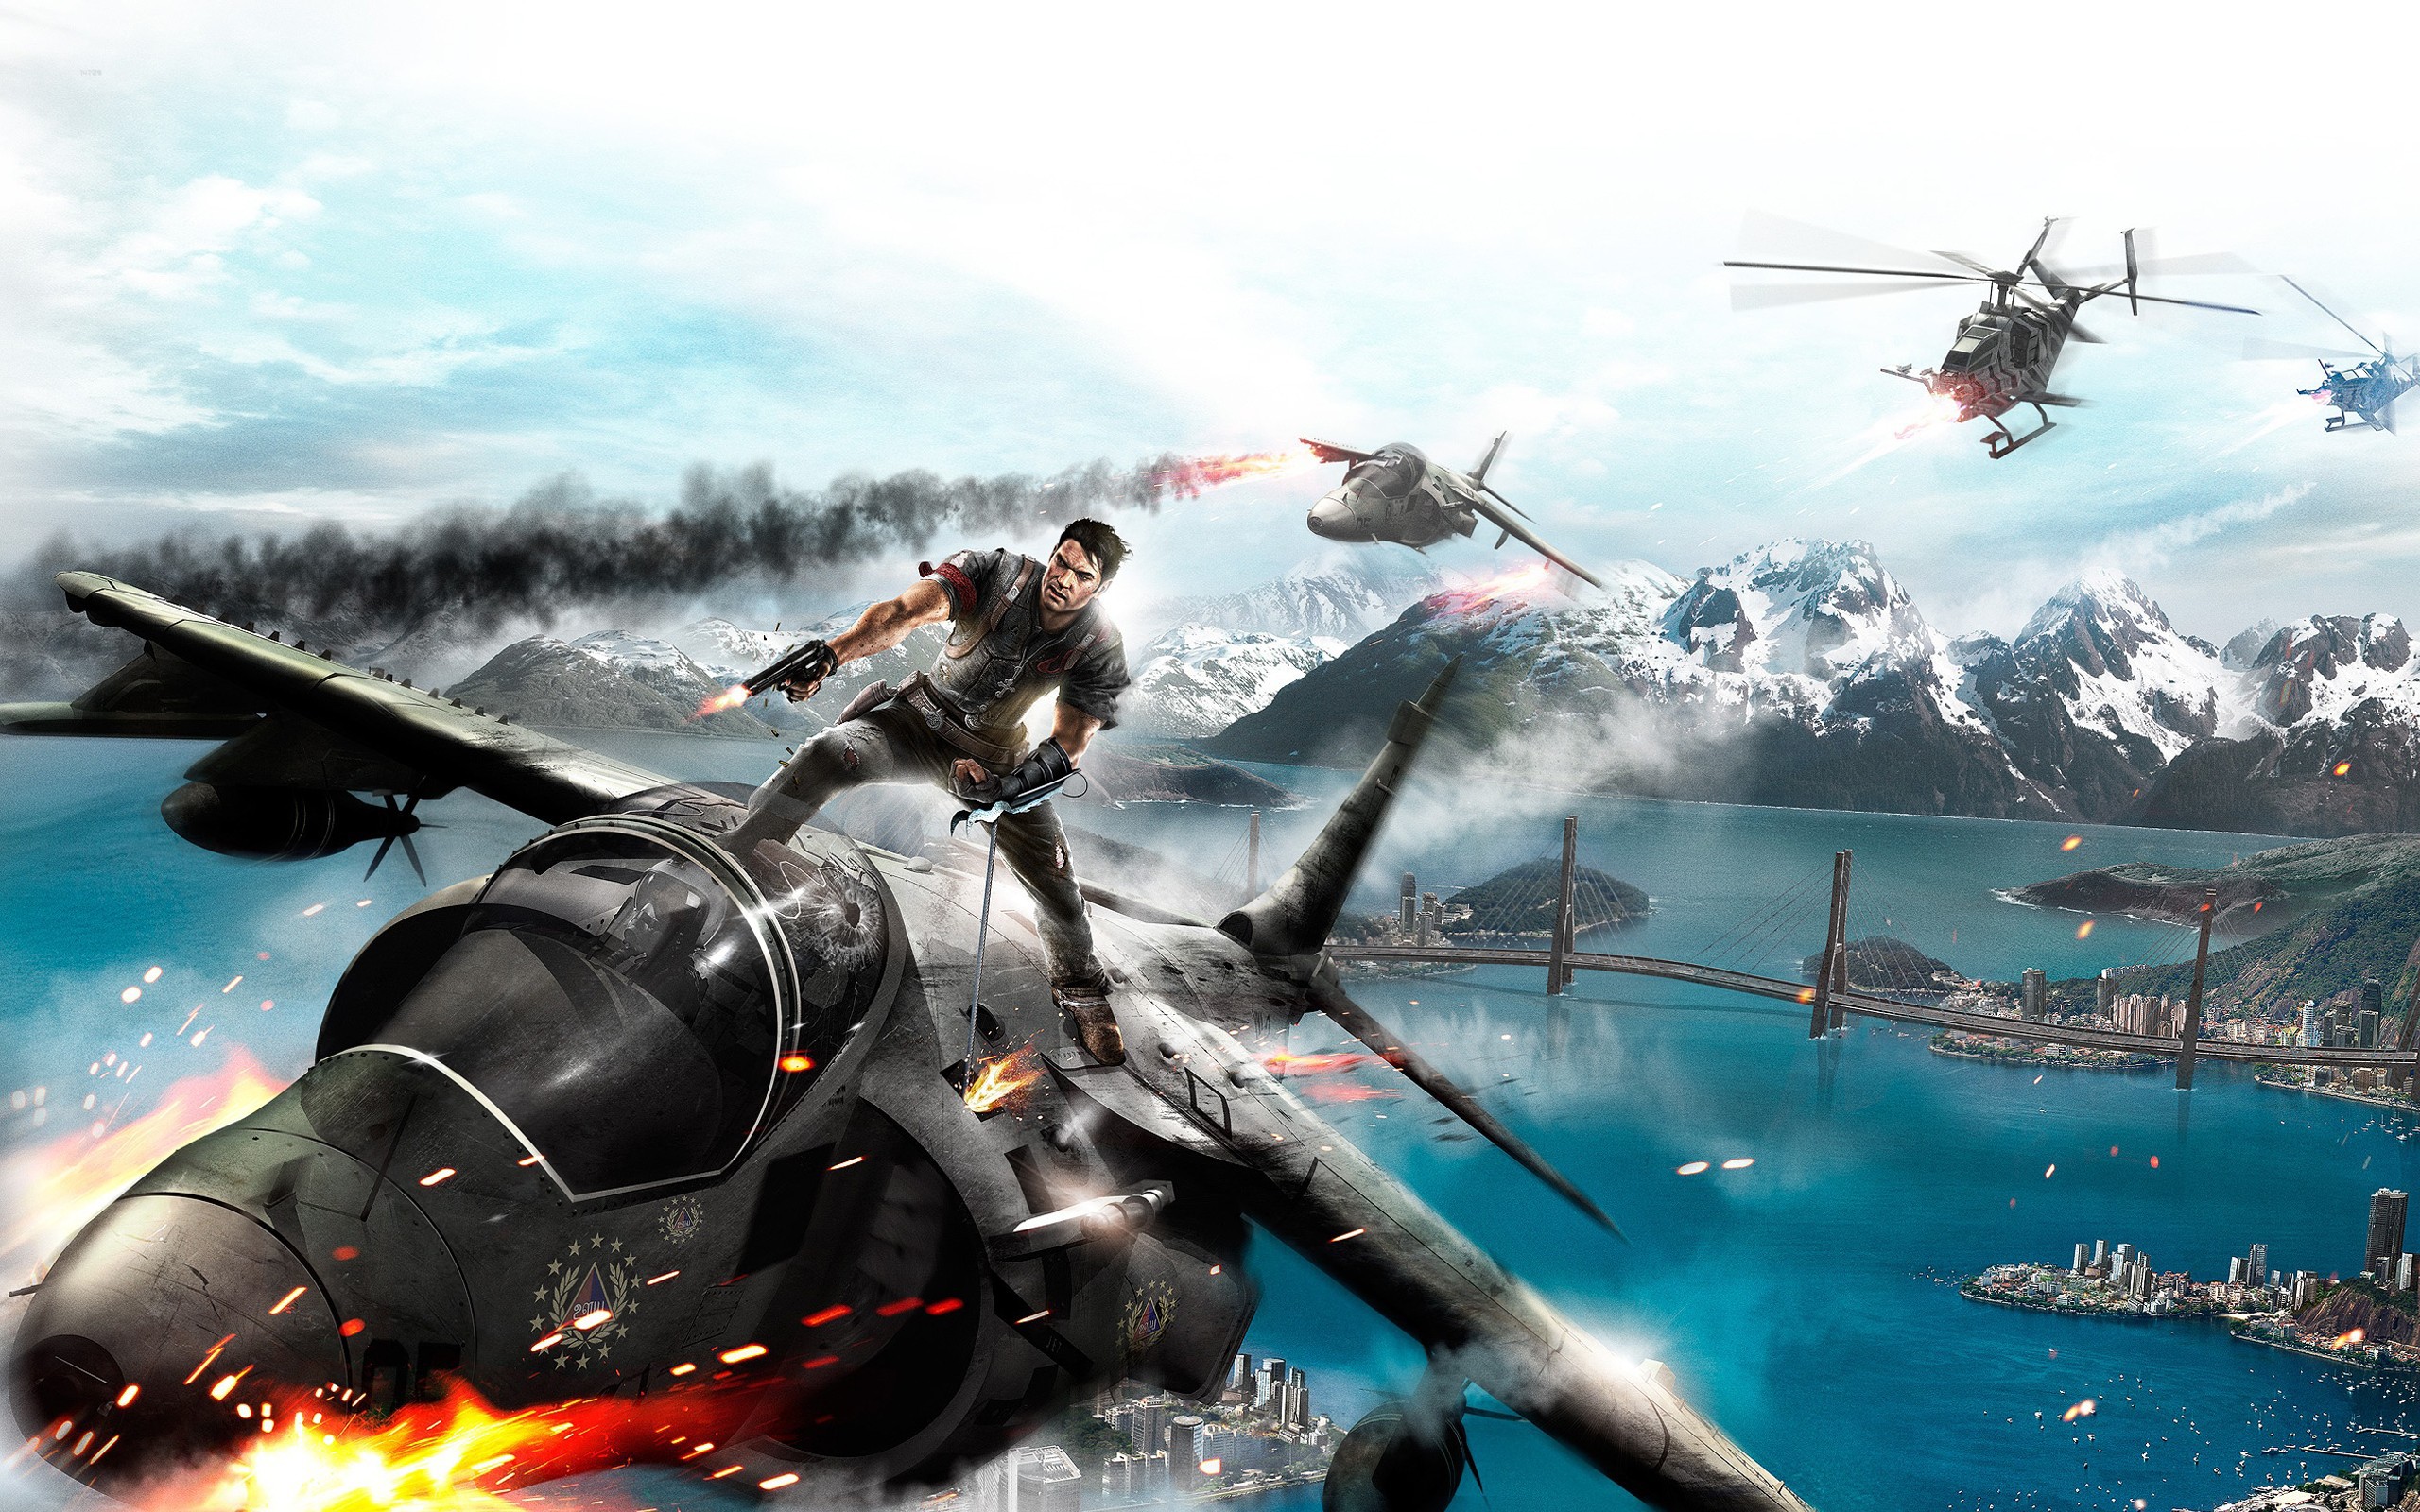 Gaming sessions v 0.2. Игра just cause 2. Игра just cause 3. Just cause 2 3 4. Just cause 4 истребитель.